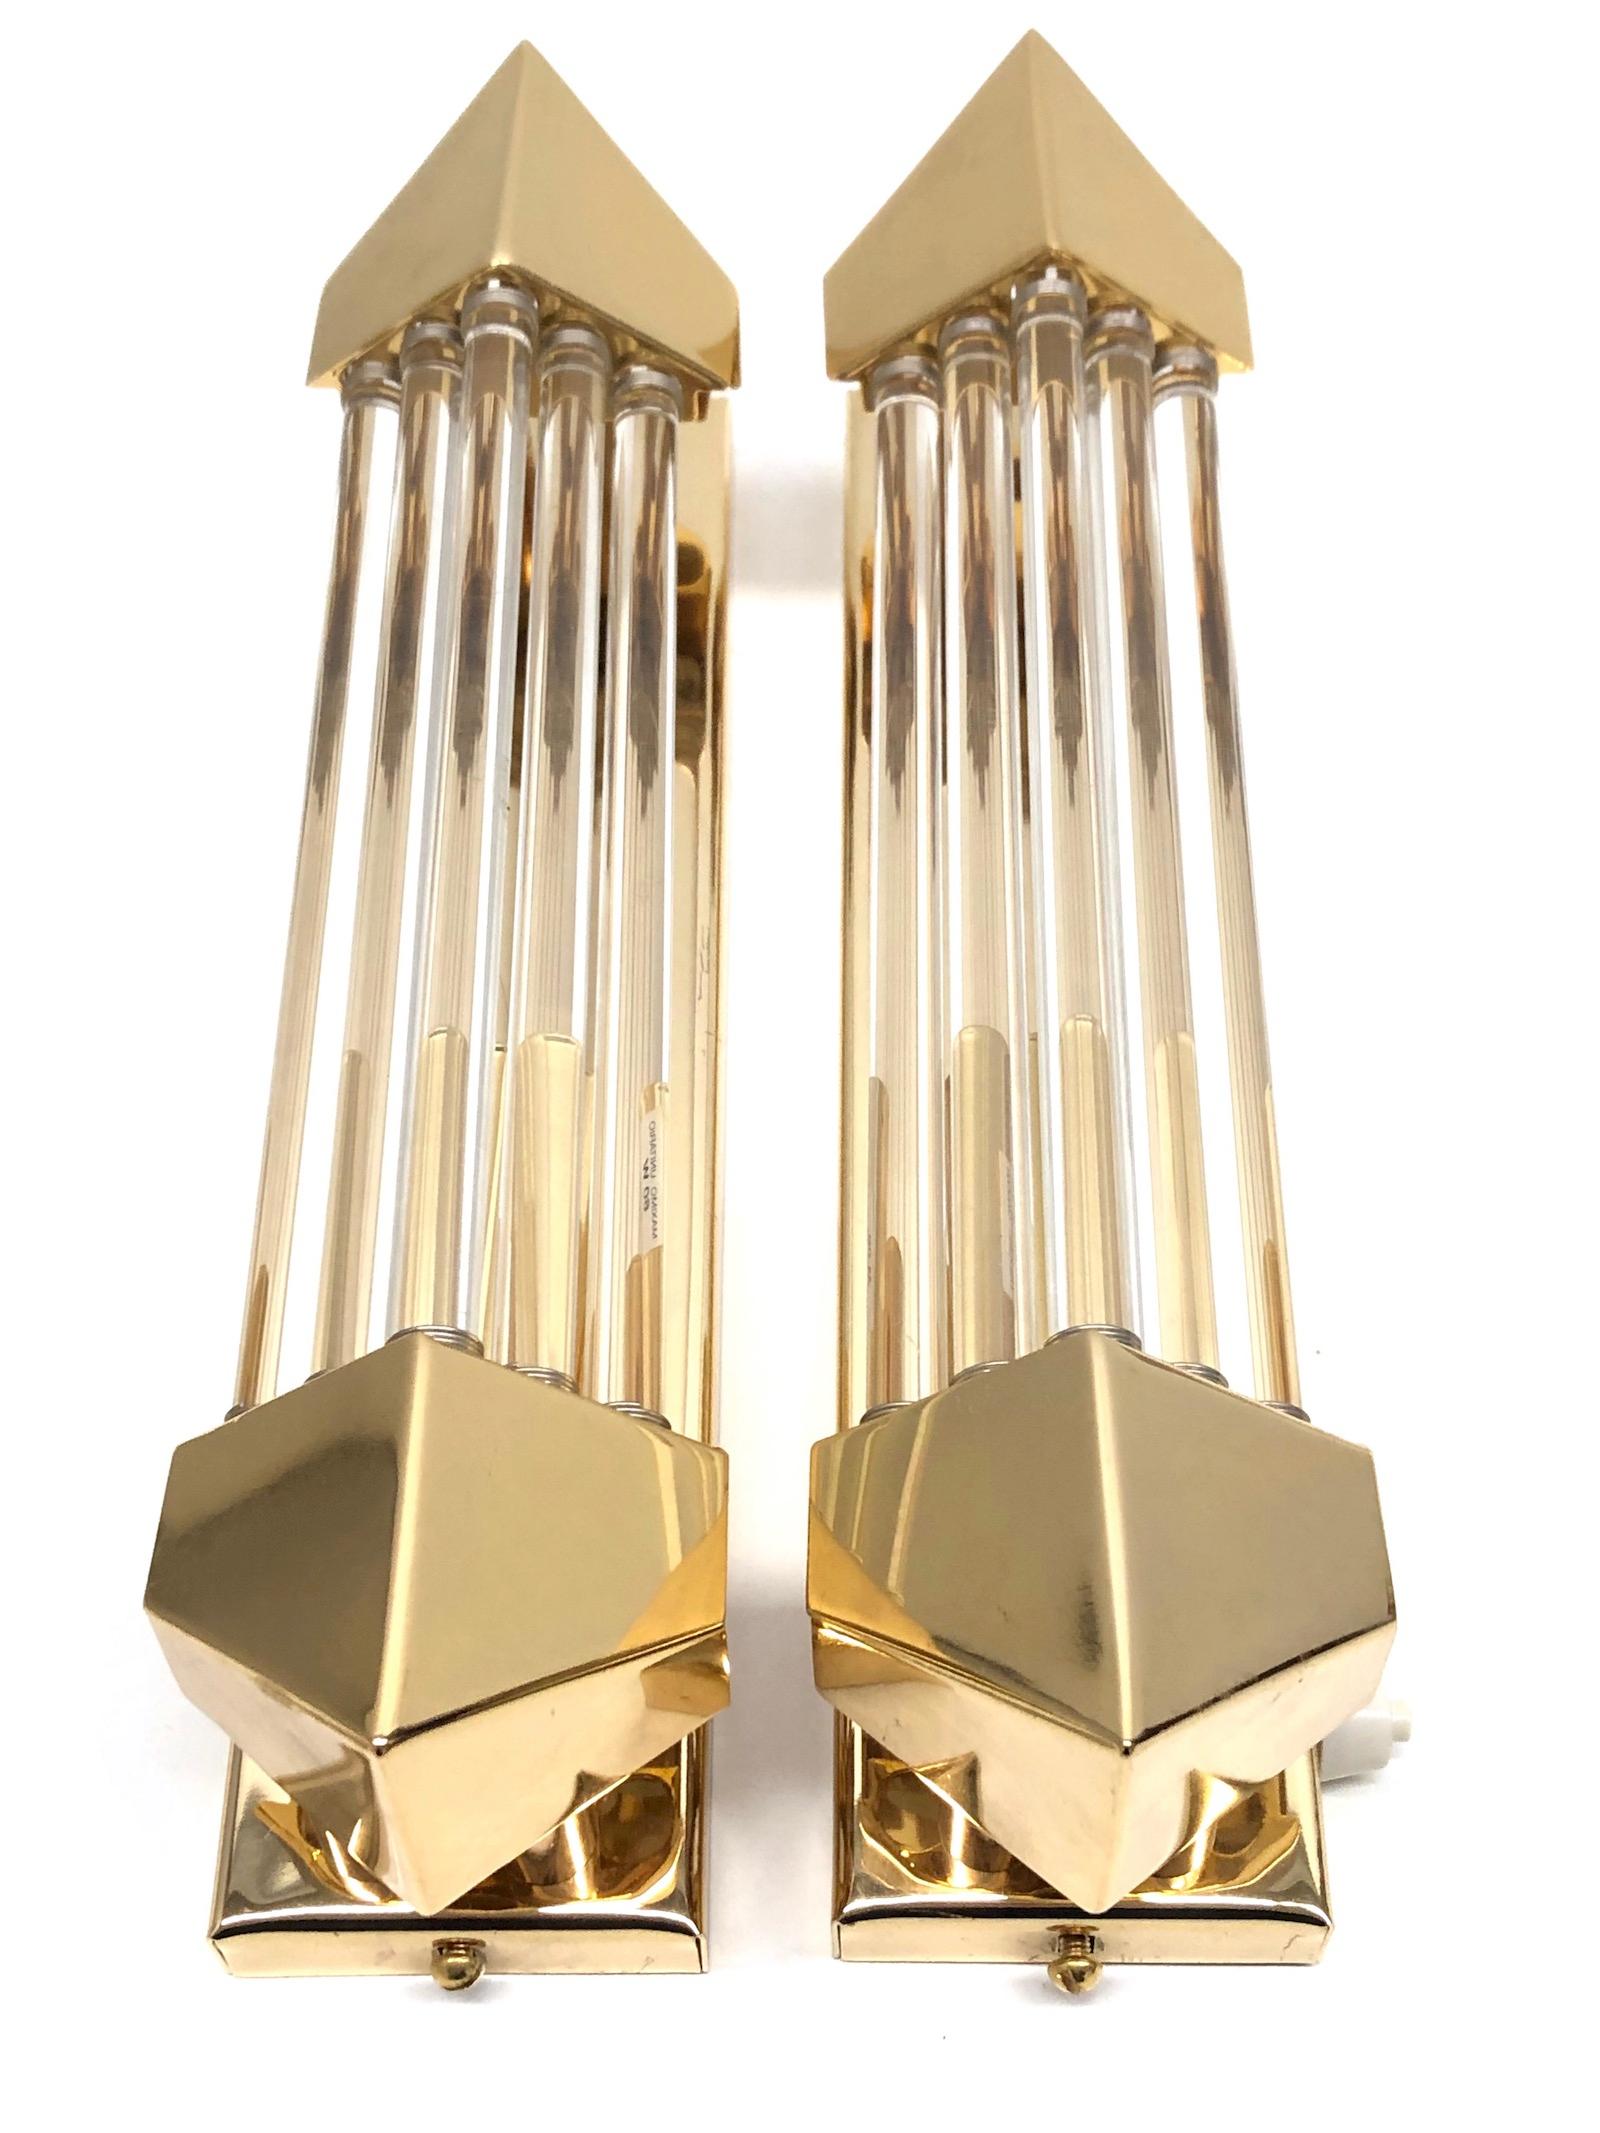 Late 20th Century Pair of Brass and Glass Rod Wall Sconces Art Deco Style, Honsel Germany